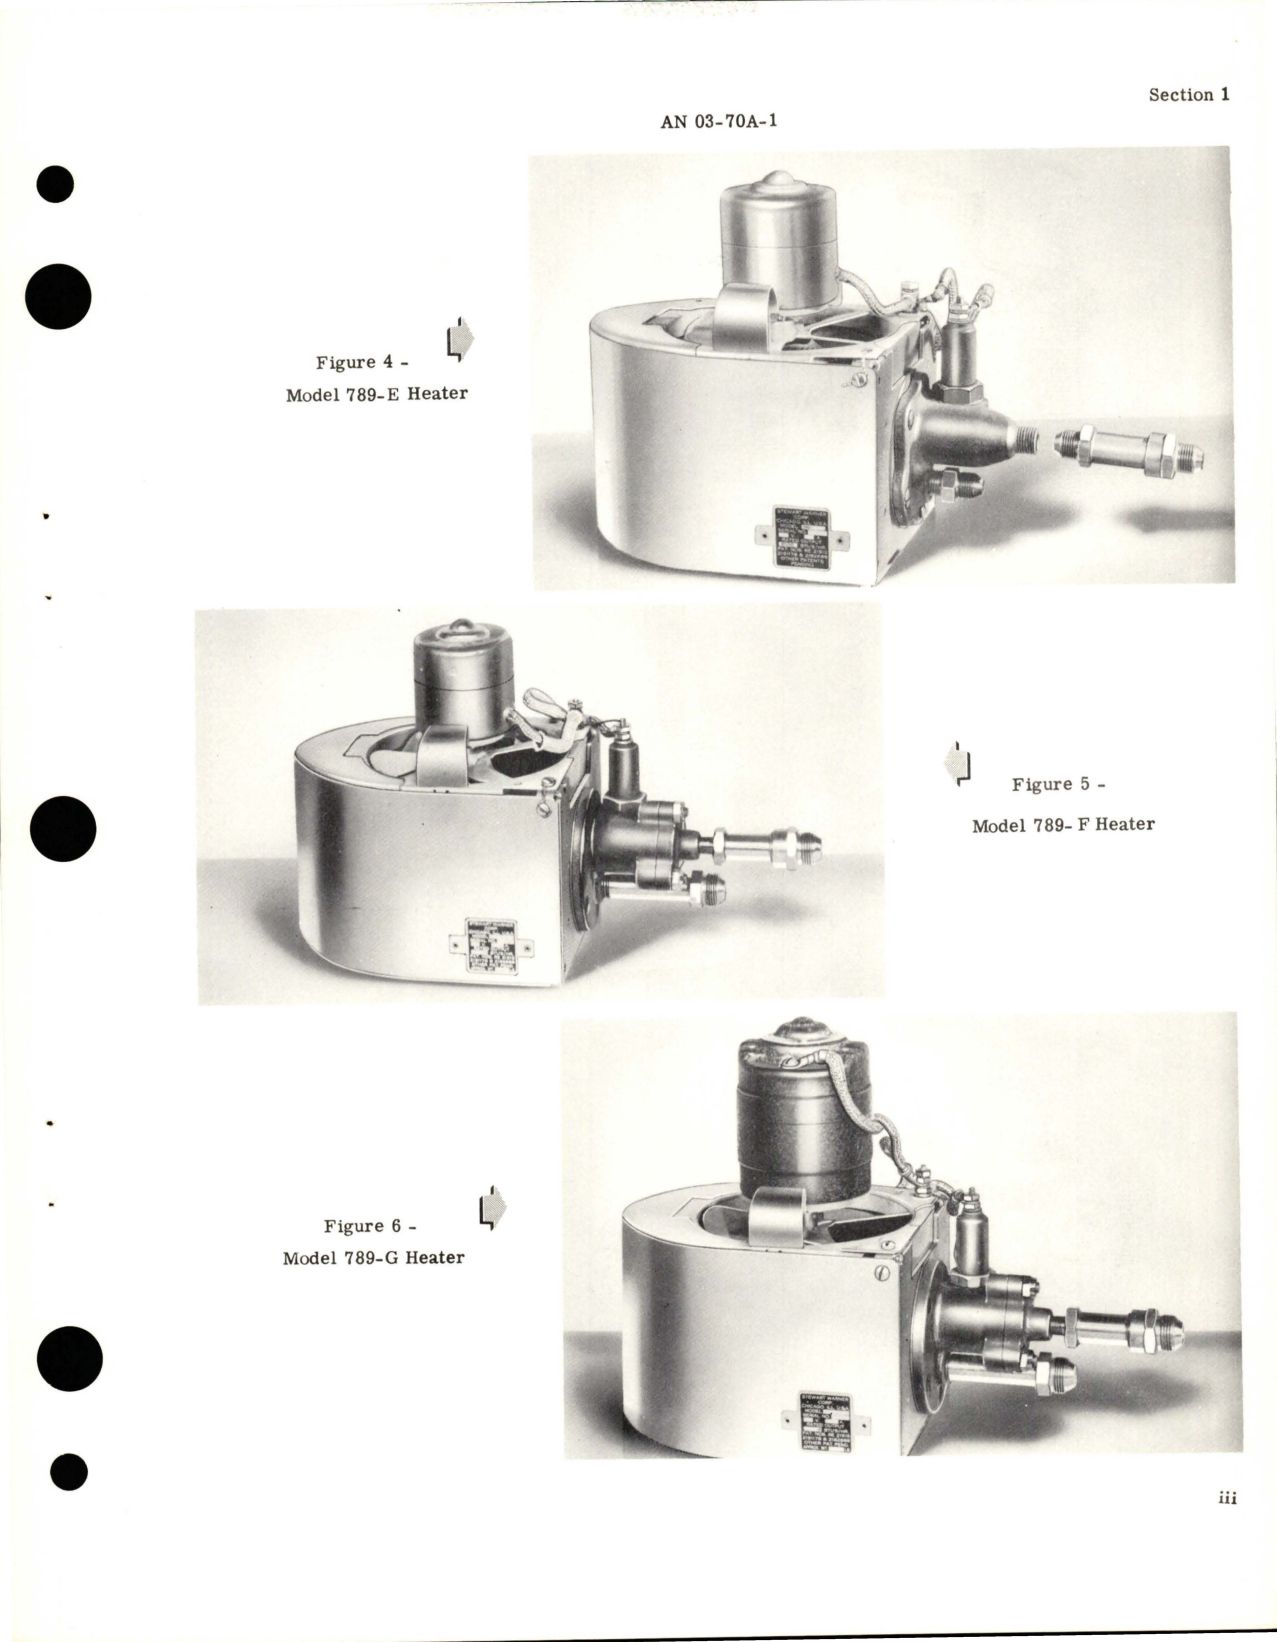 Sample page 5 from AirCorps Library document: Handbook of Instructions with Parts Catalog for Heaters 